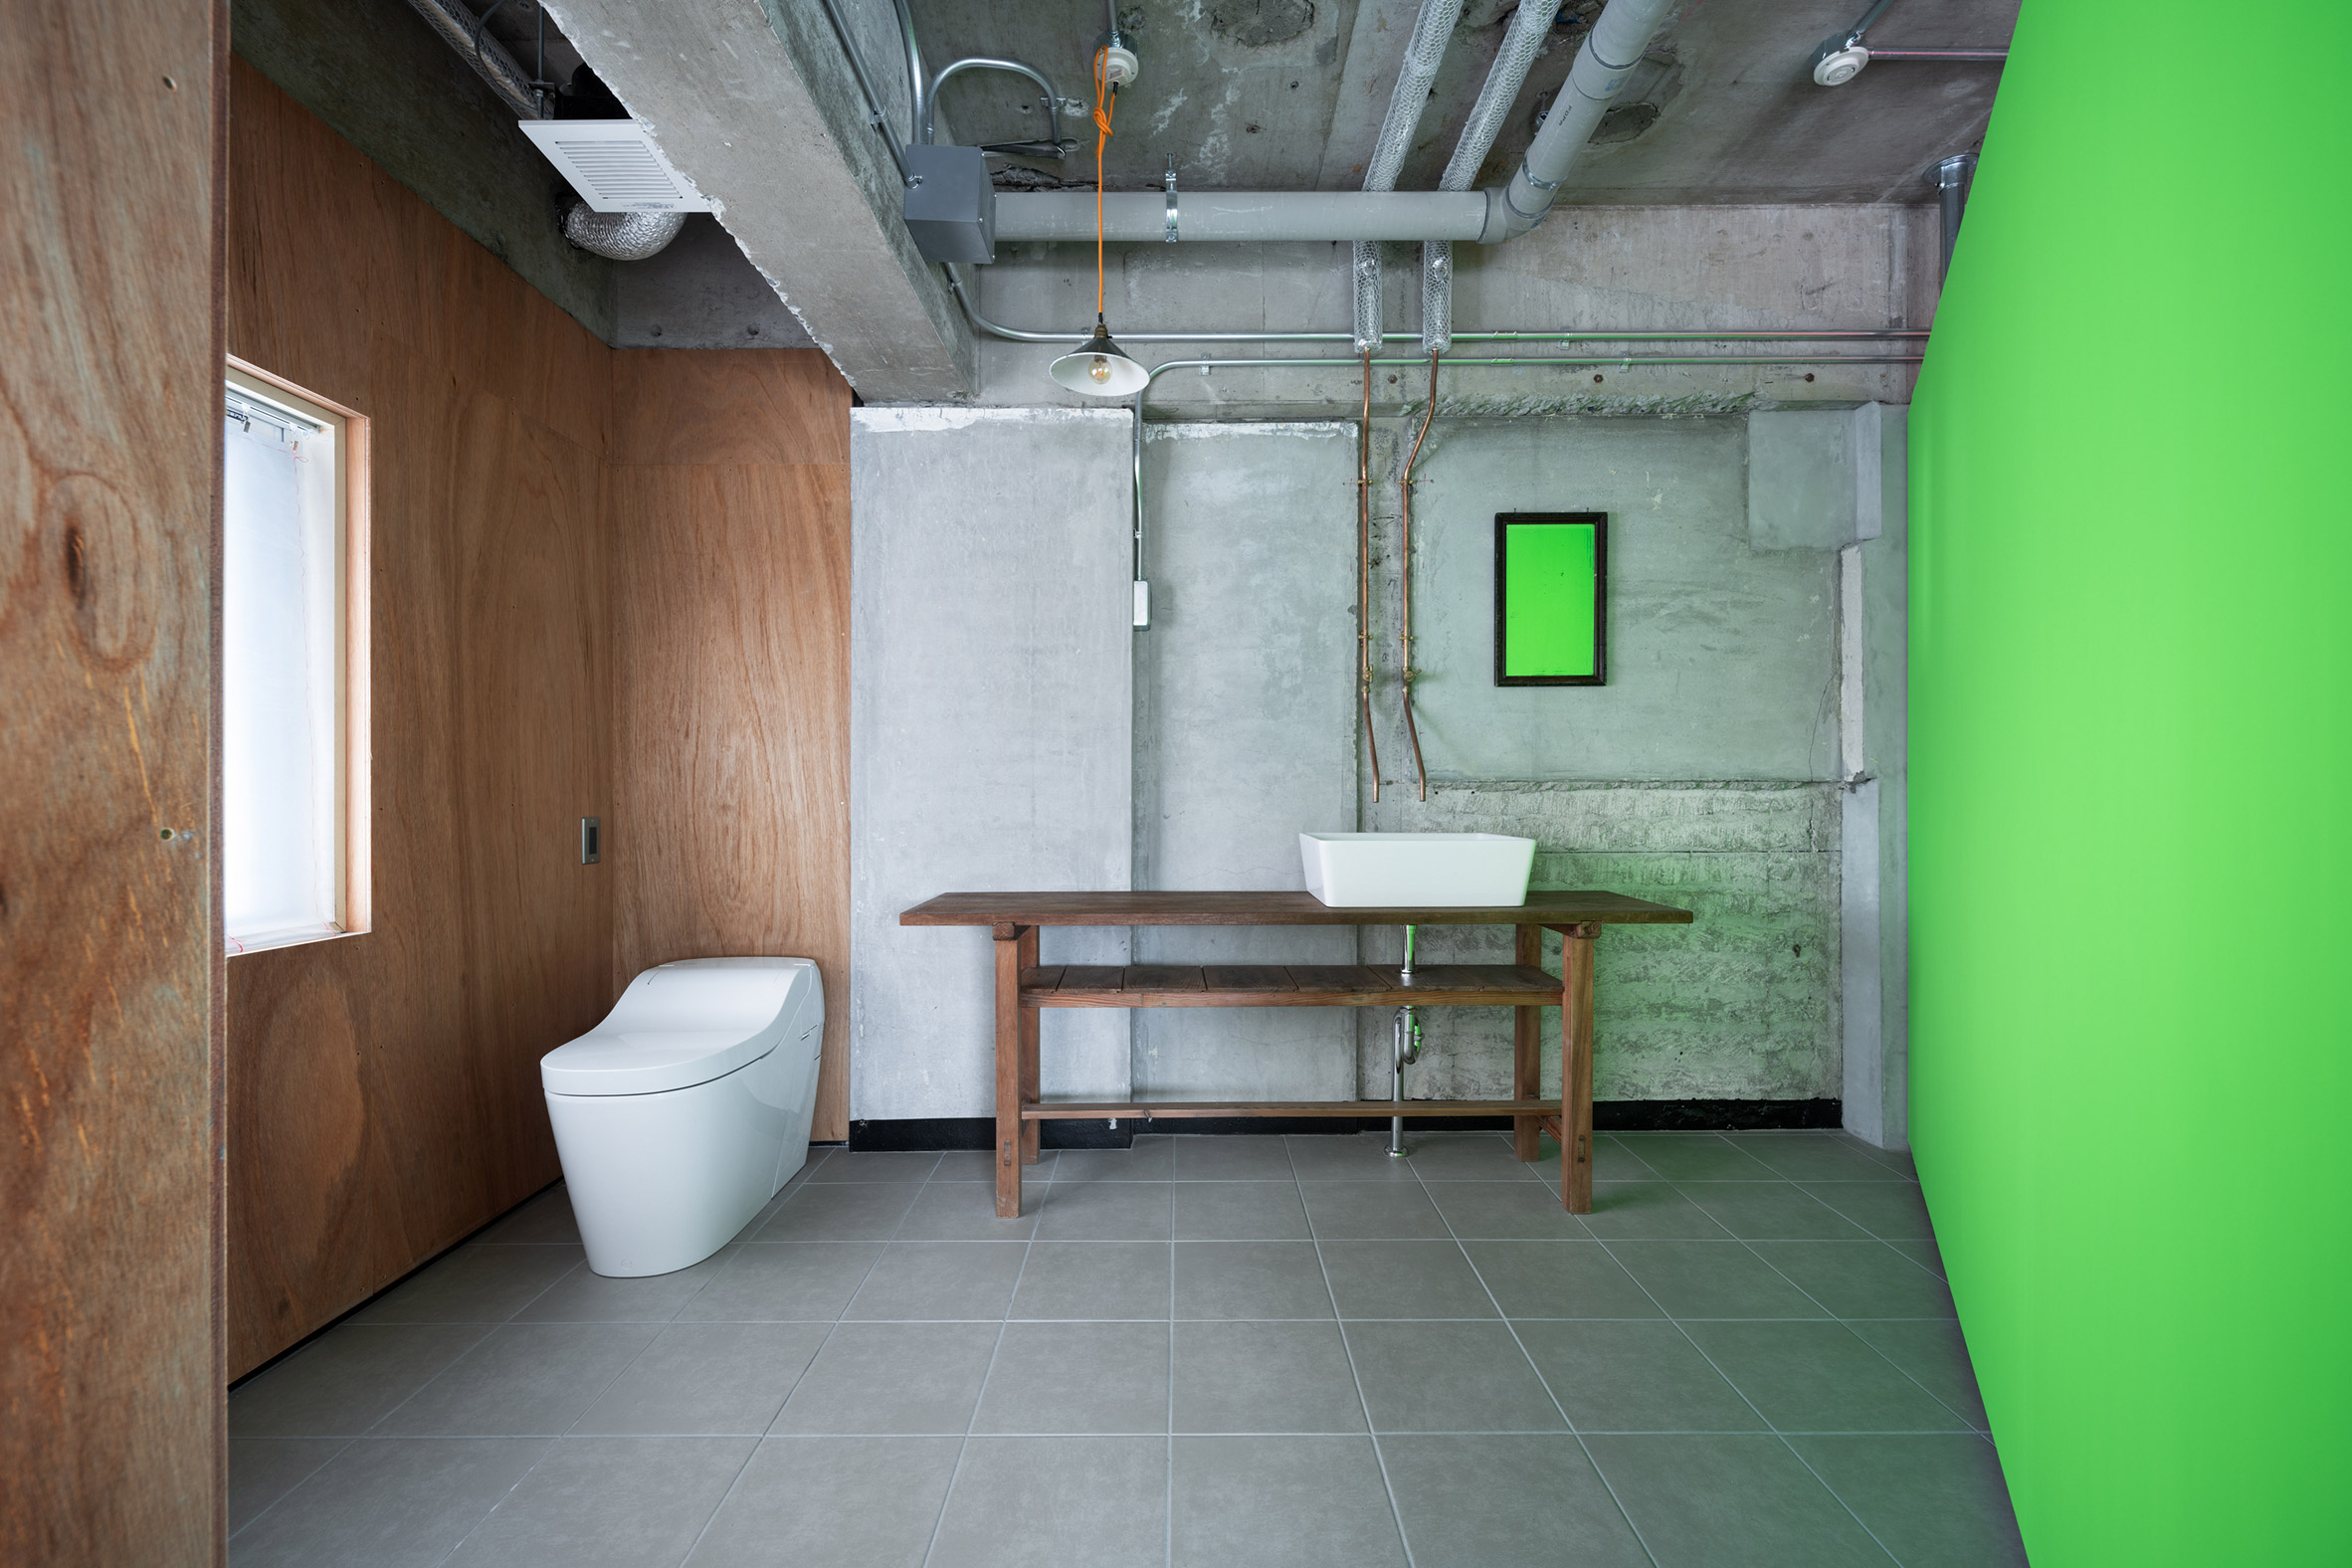 Toilet and sink on a wooden bench in an industrial bathroom with fluorescent green wall by Ab Rogers Design